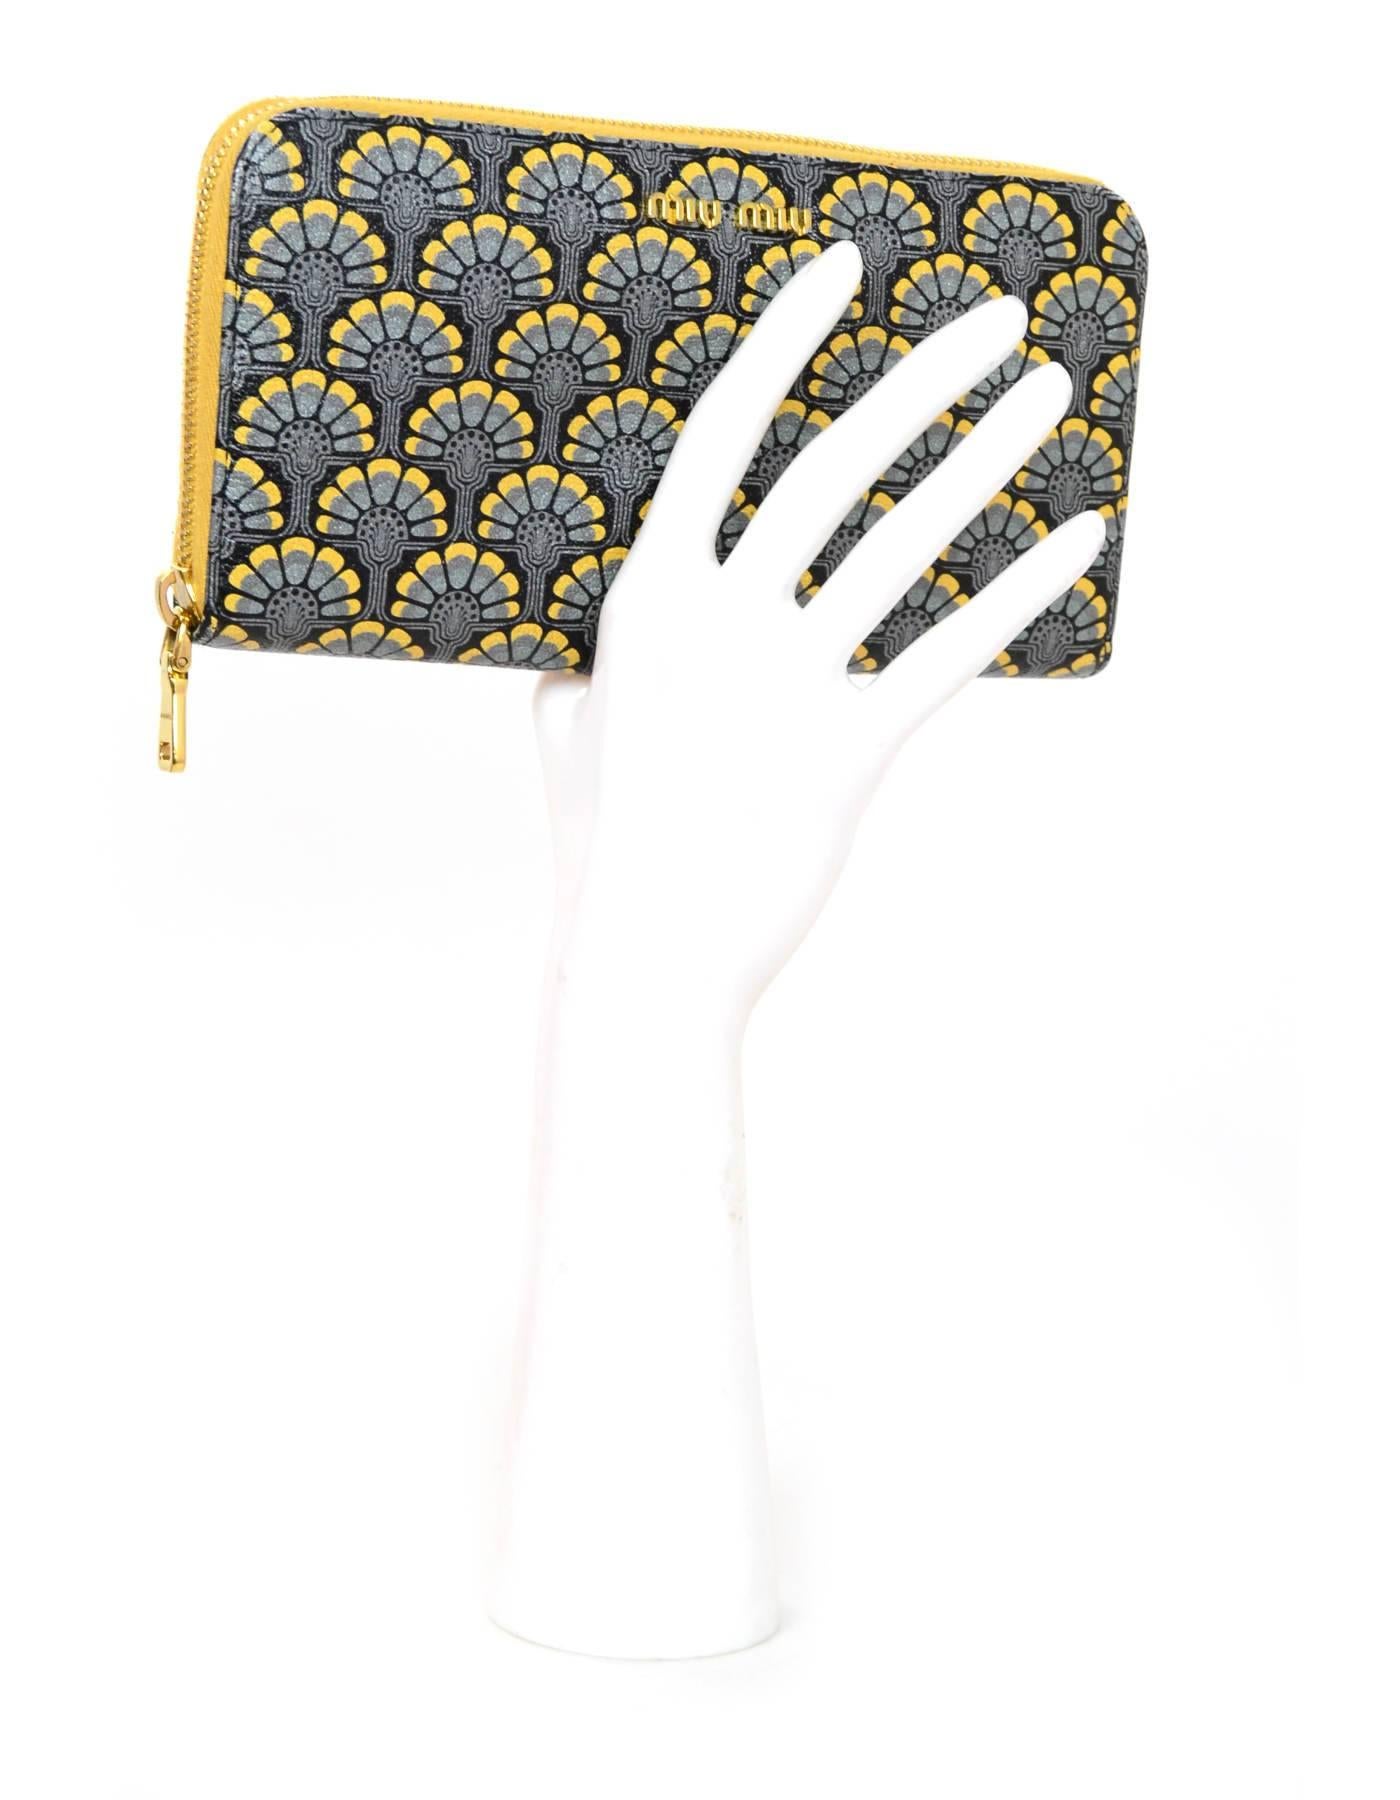 Miu Miu Blue & Yellow Floral Zip Wallet

Made In: Turkey
Color: Blue, yellow
Hardware: Goldtone
Materials: Coated canvas, metal
Lining: Yellow and print textile
Closure/Opening: Zip top
Exterior Pockets: None
Interior Pockets: Twelve card slots, two